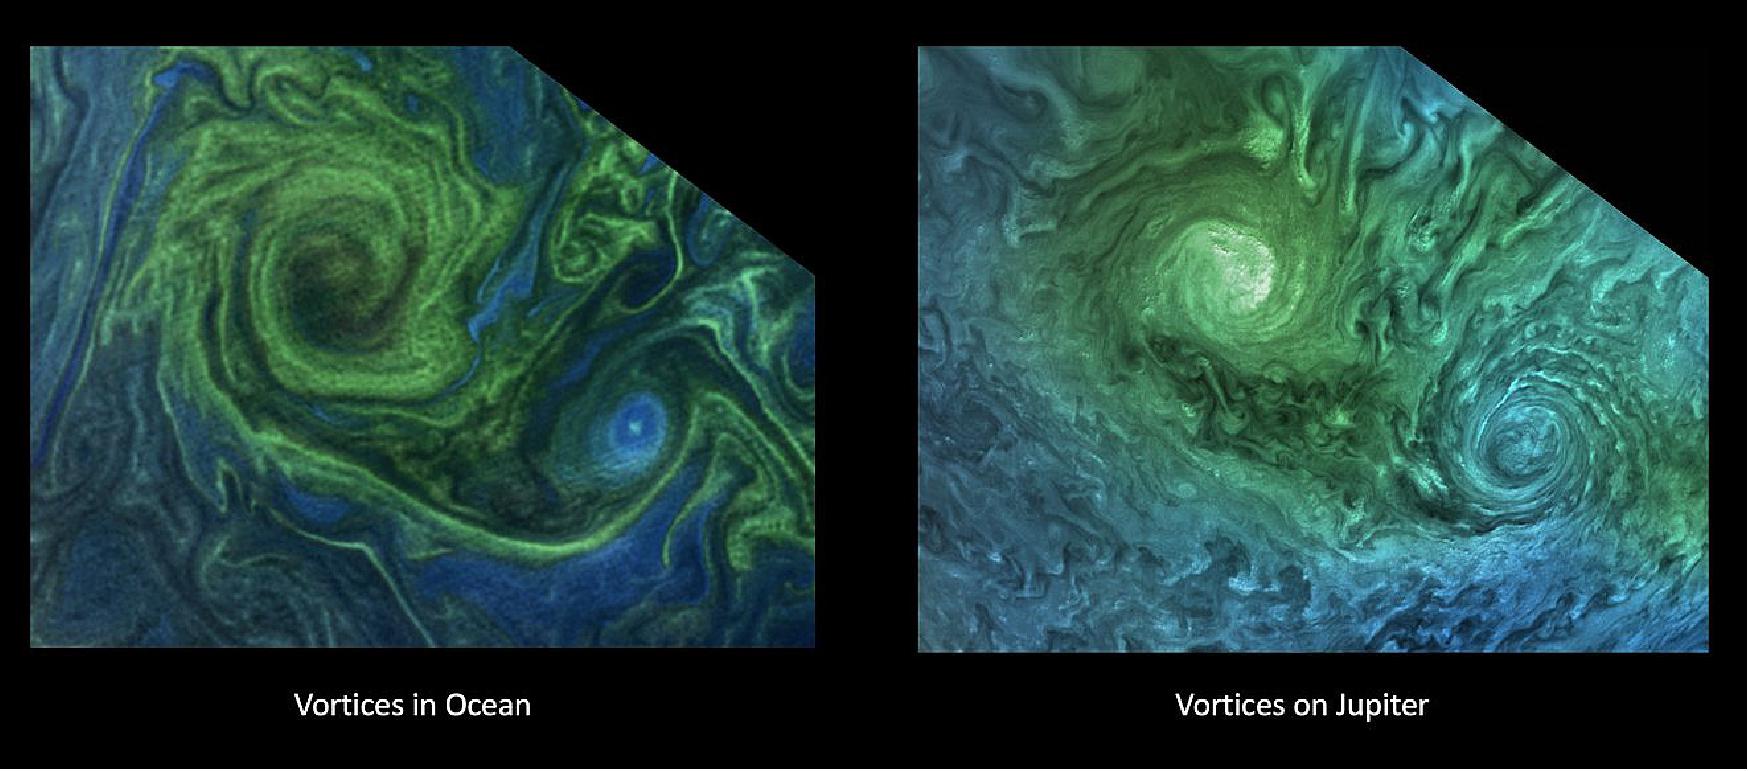 Figure 7: Left to right: A phytoplankton bloom in the Norwegian Sea, and turbulent clouds in Jupiter's atmosphere. Jupiter images provided by NASA's Juno spacecraft have given oceanographers the raw materials to study the rich turbulence at the gas giant's poles and the physical forces that drive large cyclones on Jupiter (image credit: NASA OBPG OB.DAAC/GSFC/Aqua/MODIS. Image processing: Gerald Eichstadt CC BY)